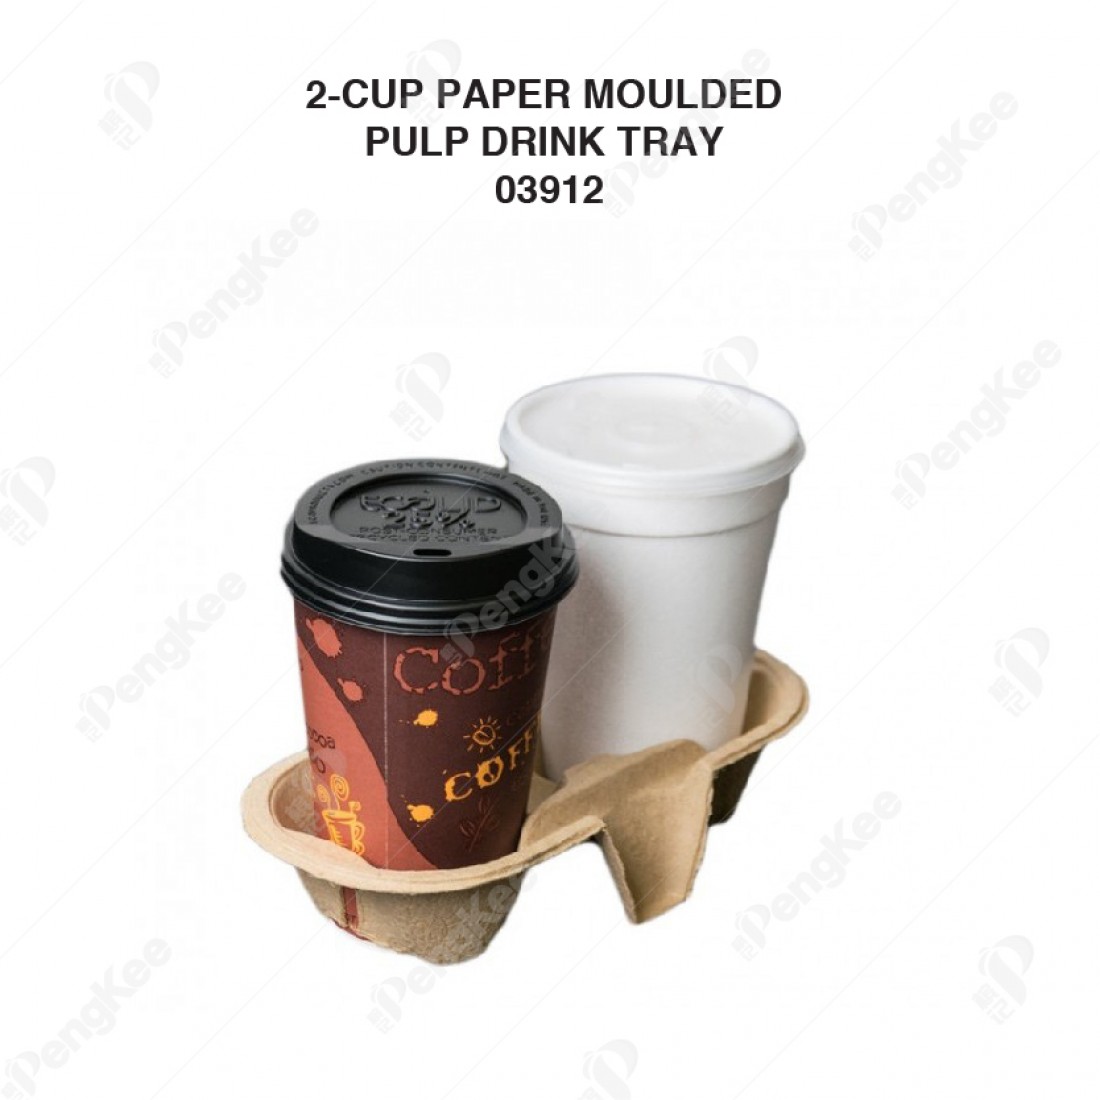 2-CUP PAPER MOULDED PULP DRINK TRAY 2 (100'S) (6PKTCTN) 